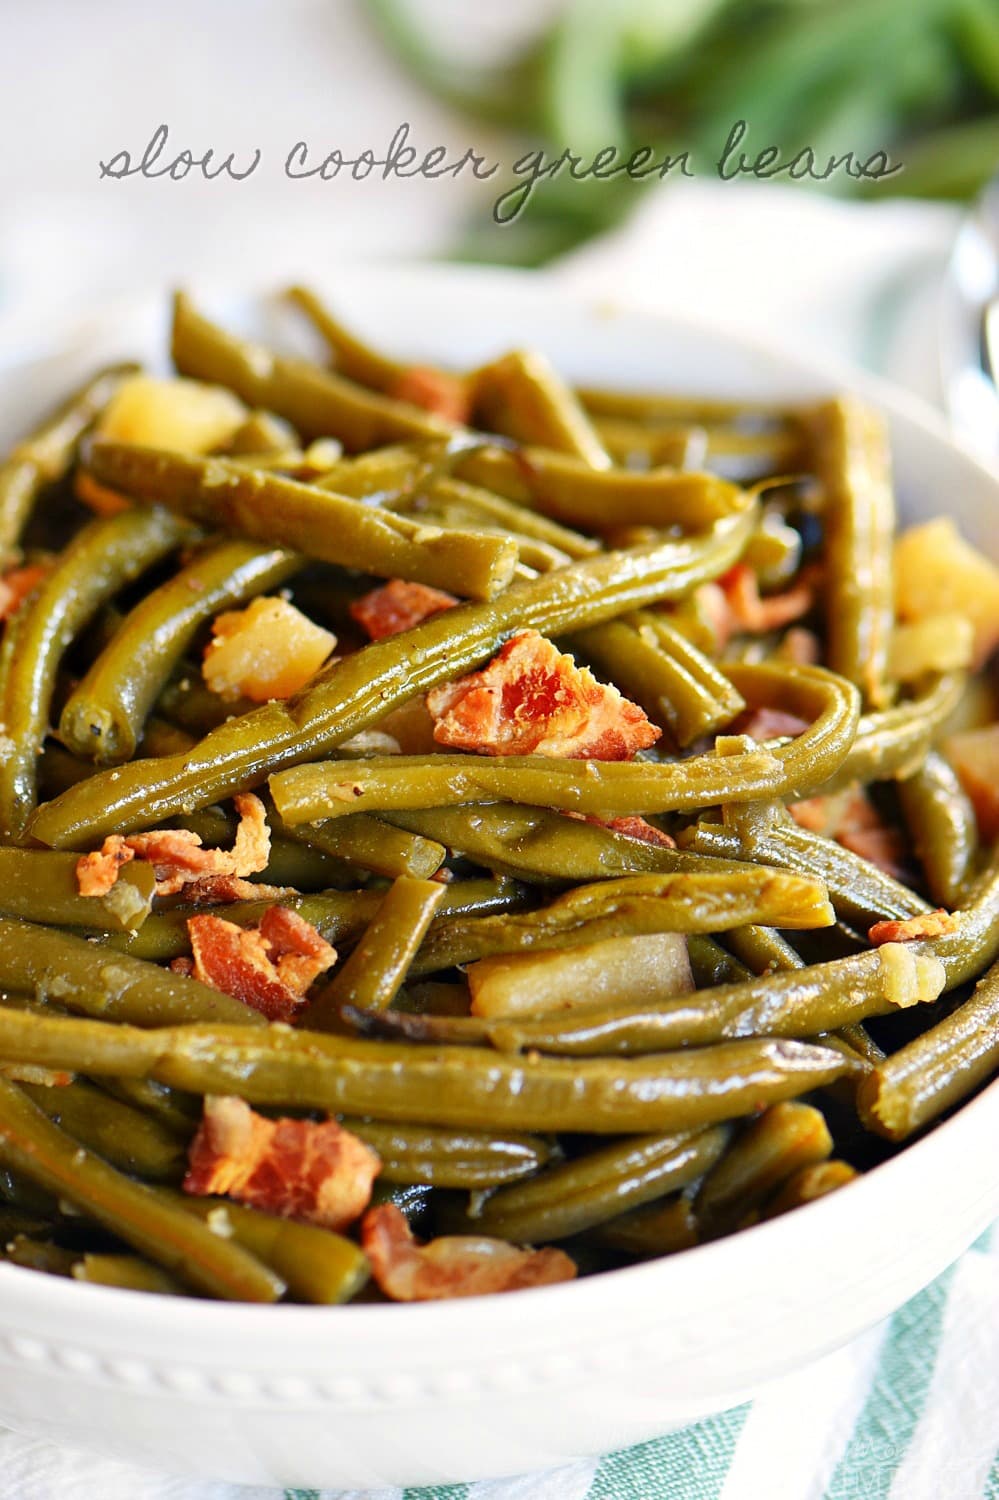 https://www.momontimeout.com/wp-content/uploads/2018/11/slow-cooker-green-beans-with-bacon-potatoes-recipe.jpg